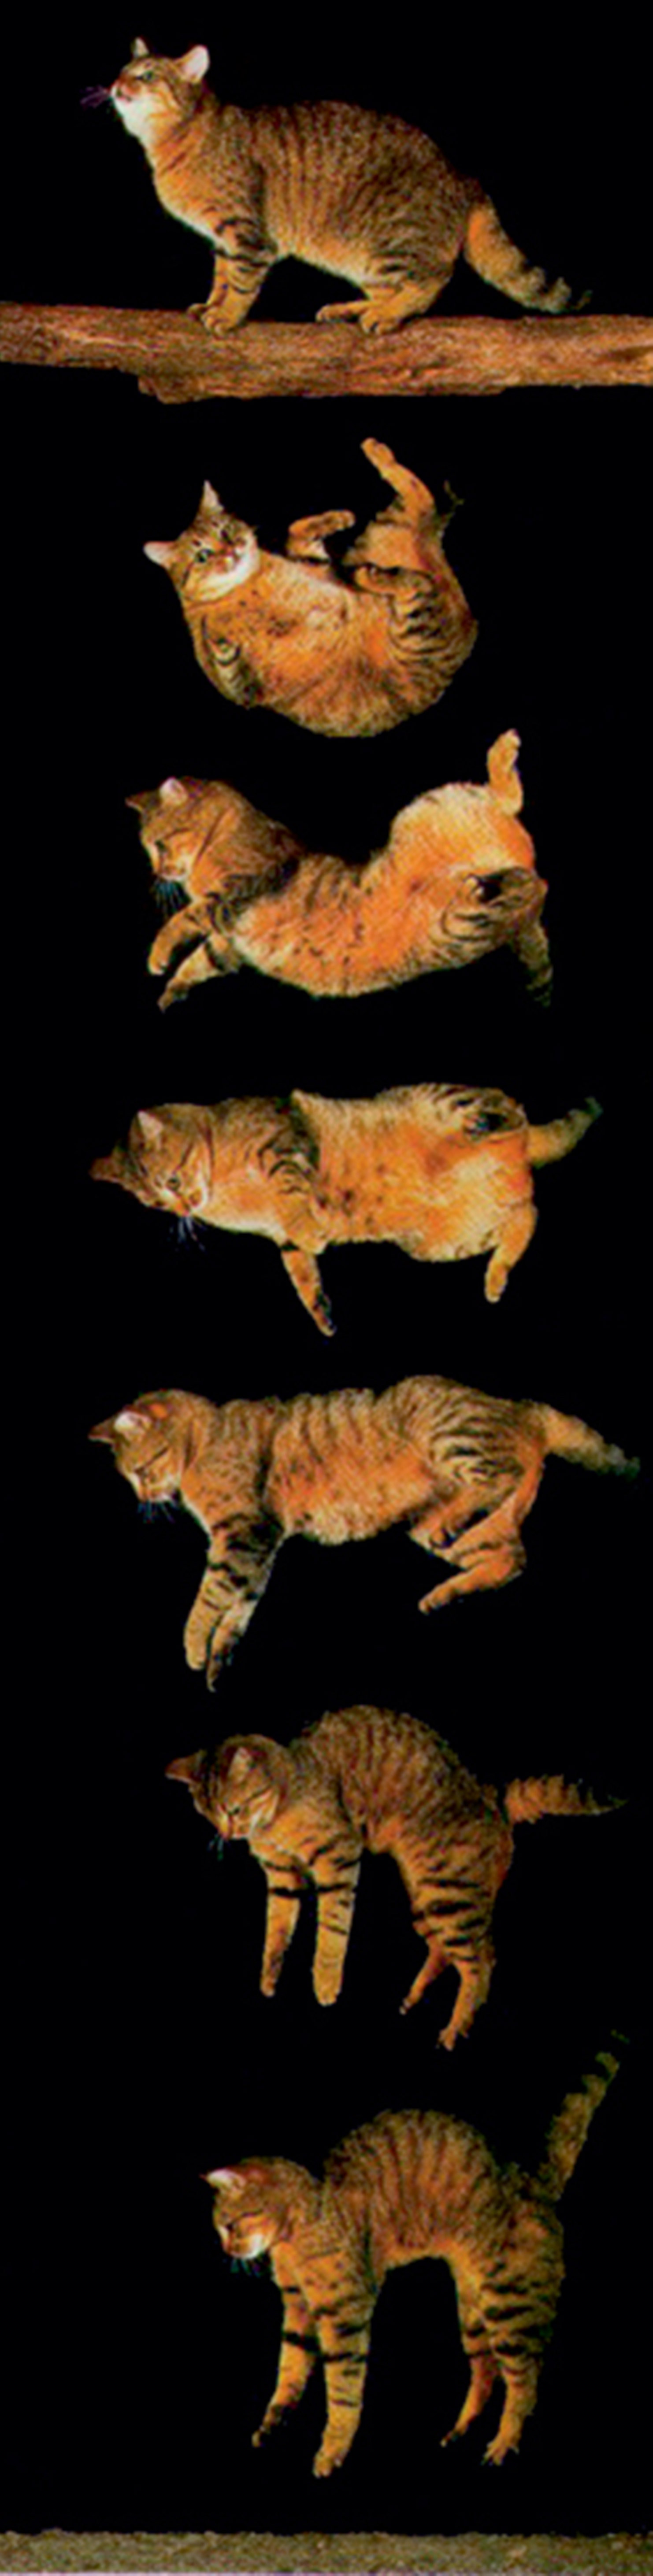 A time-lapse photograph showing the positions assumed by a cat as it falls from a branch.